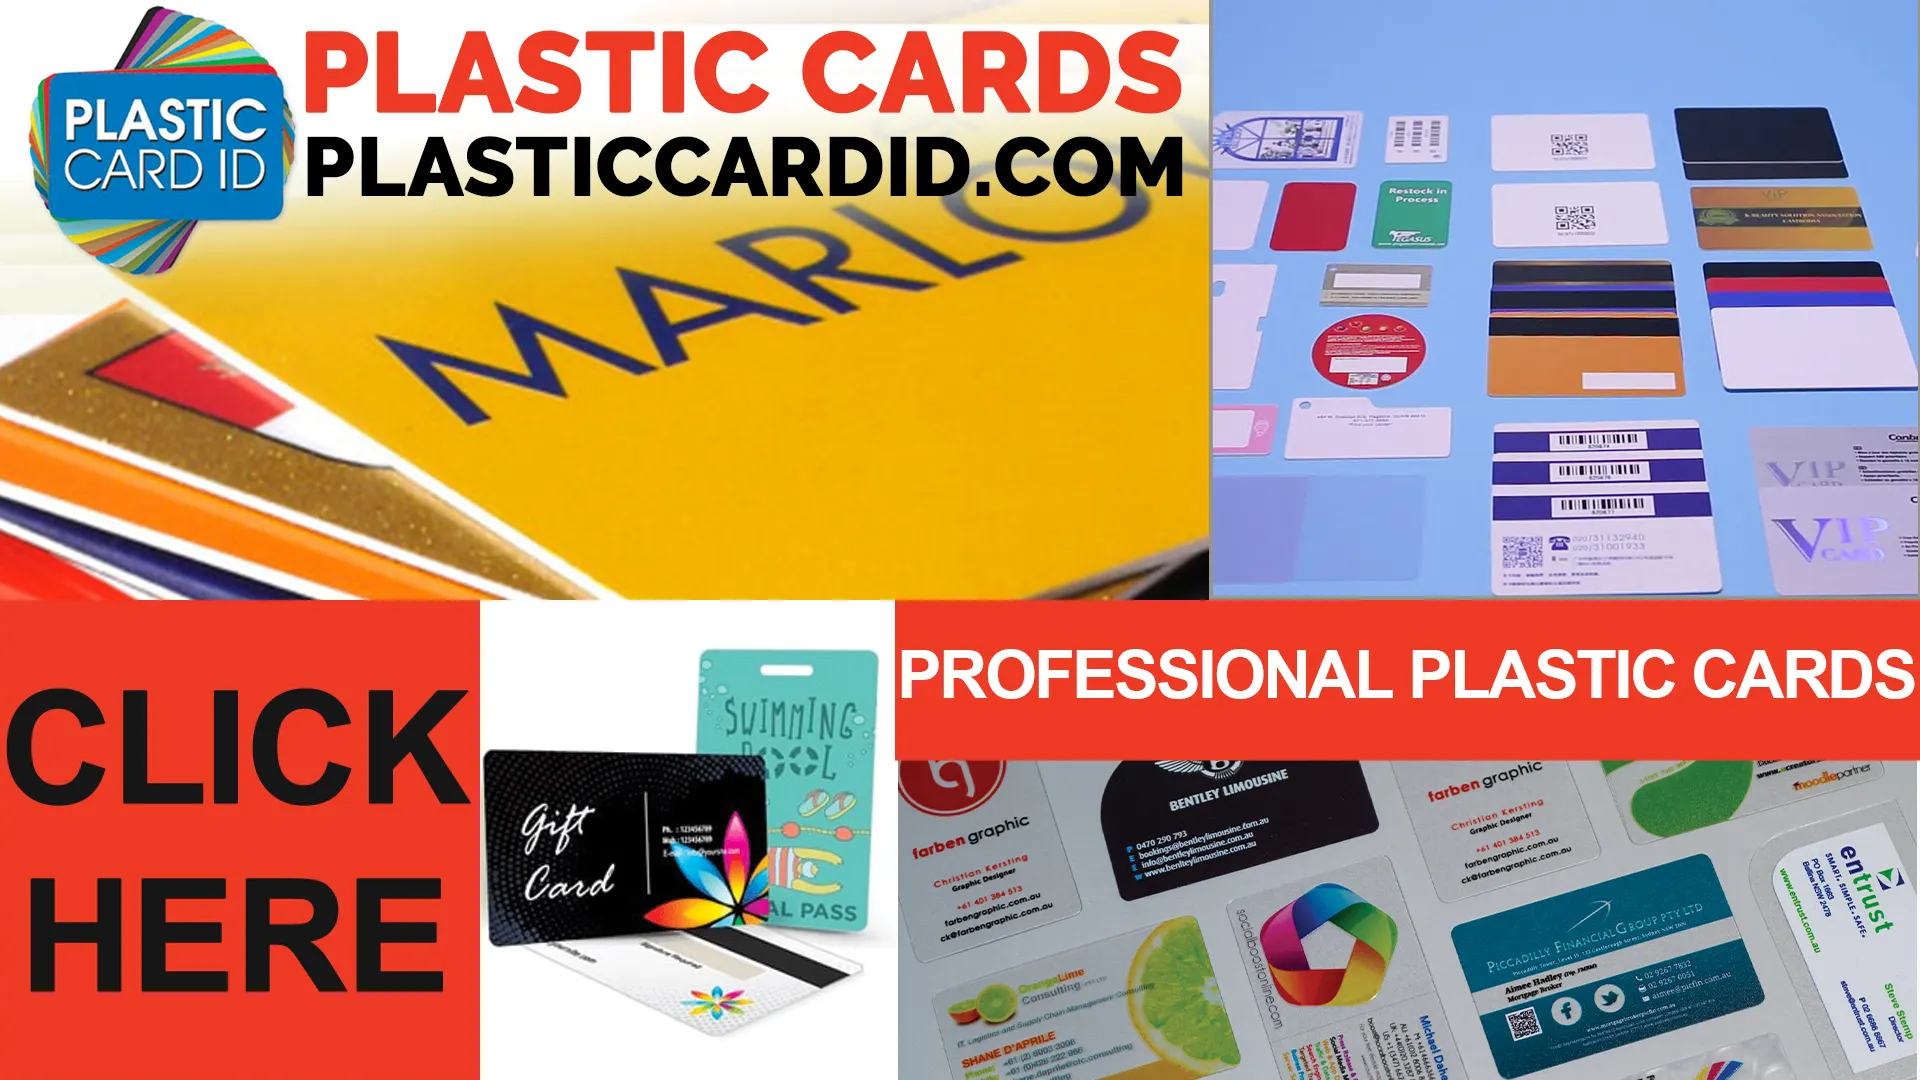 Card Technology for Every Business Need